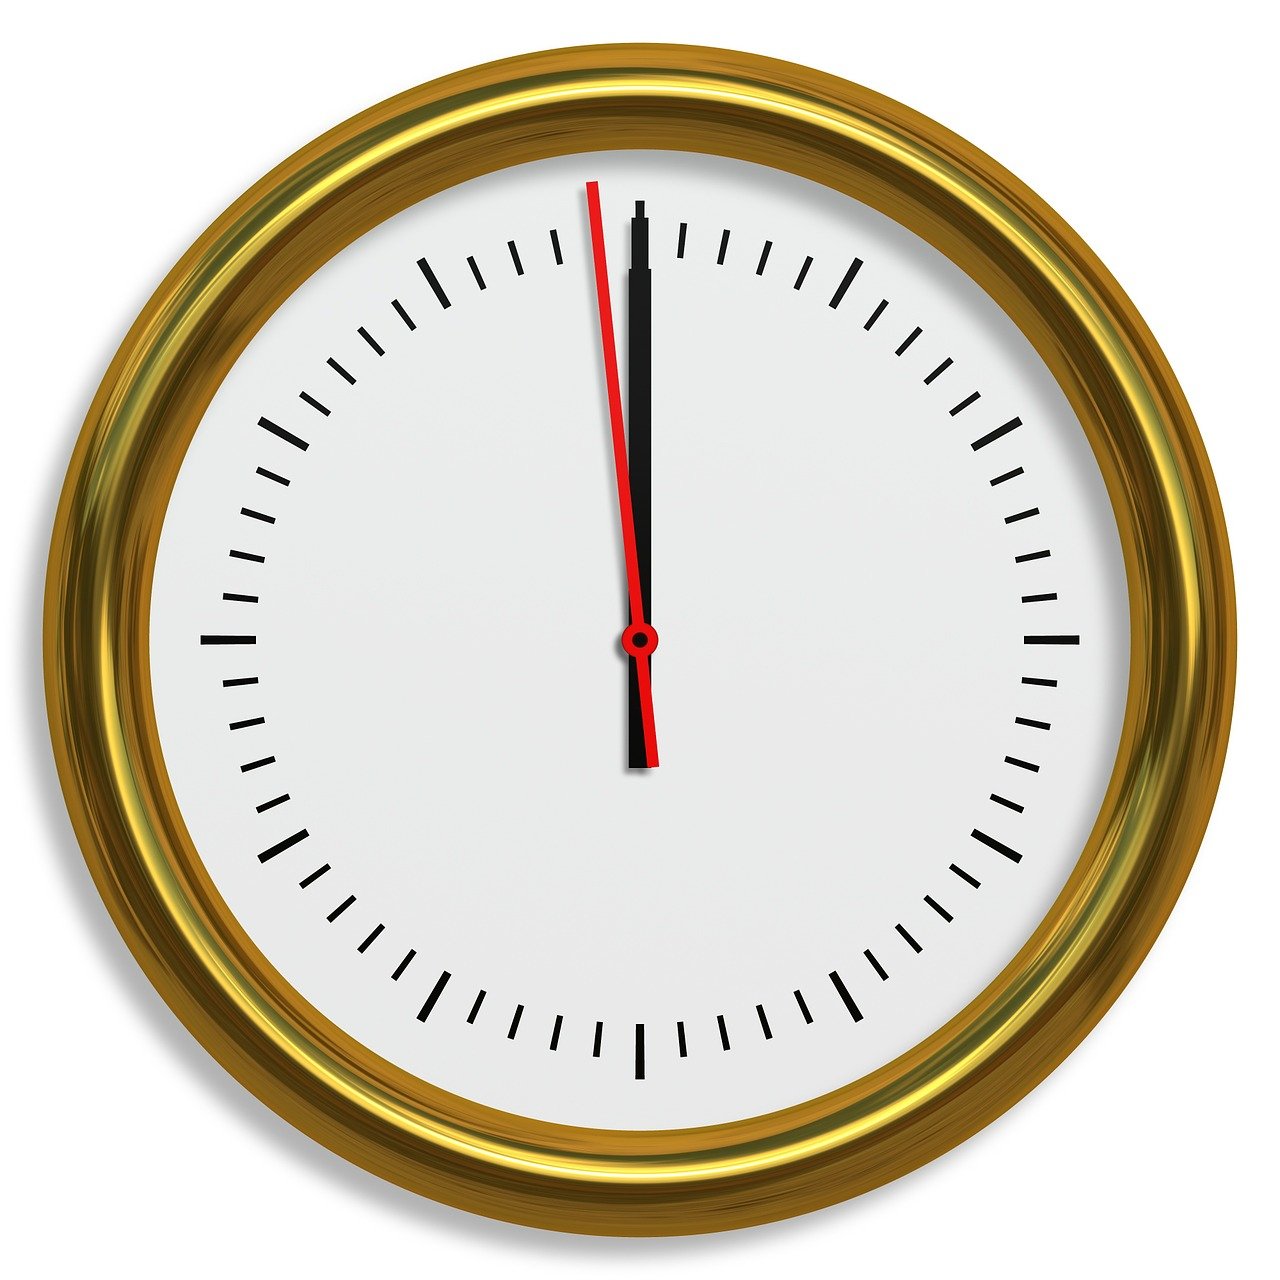 a gold clock with a red second hand, a digital rendering, minimalism, istockphoto, high res photo, its hour come round at last, an illustration